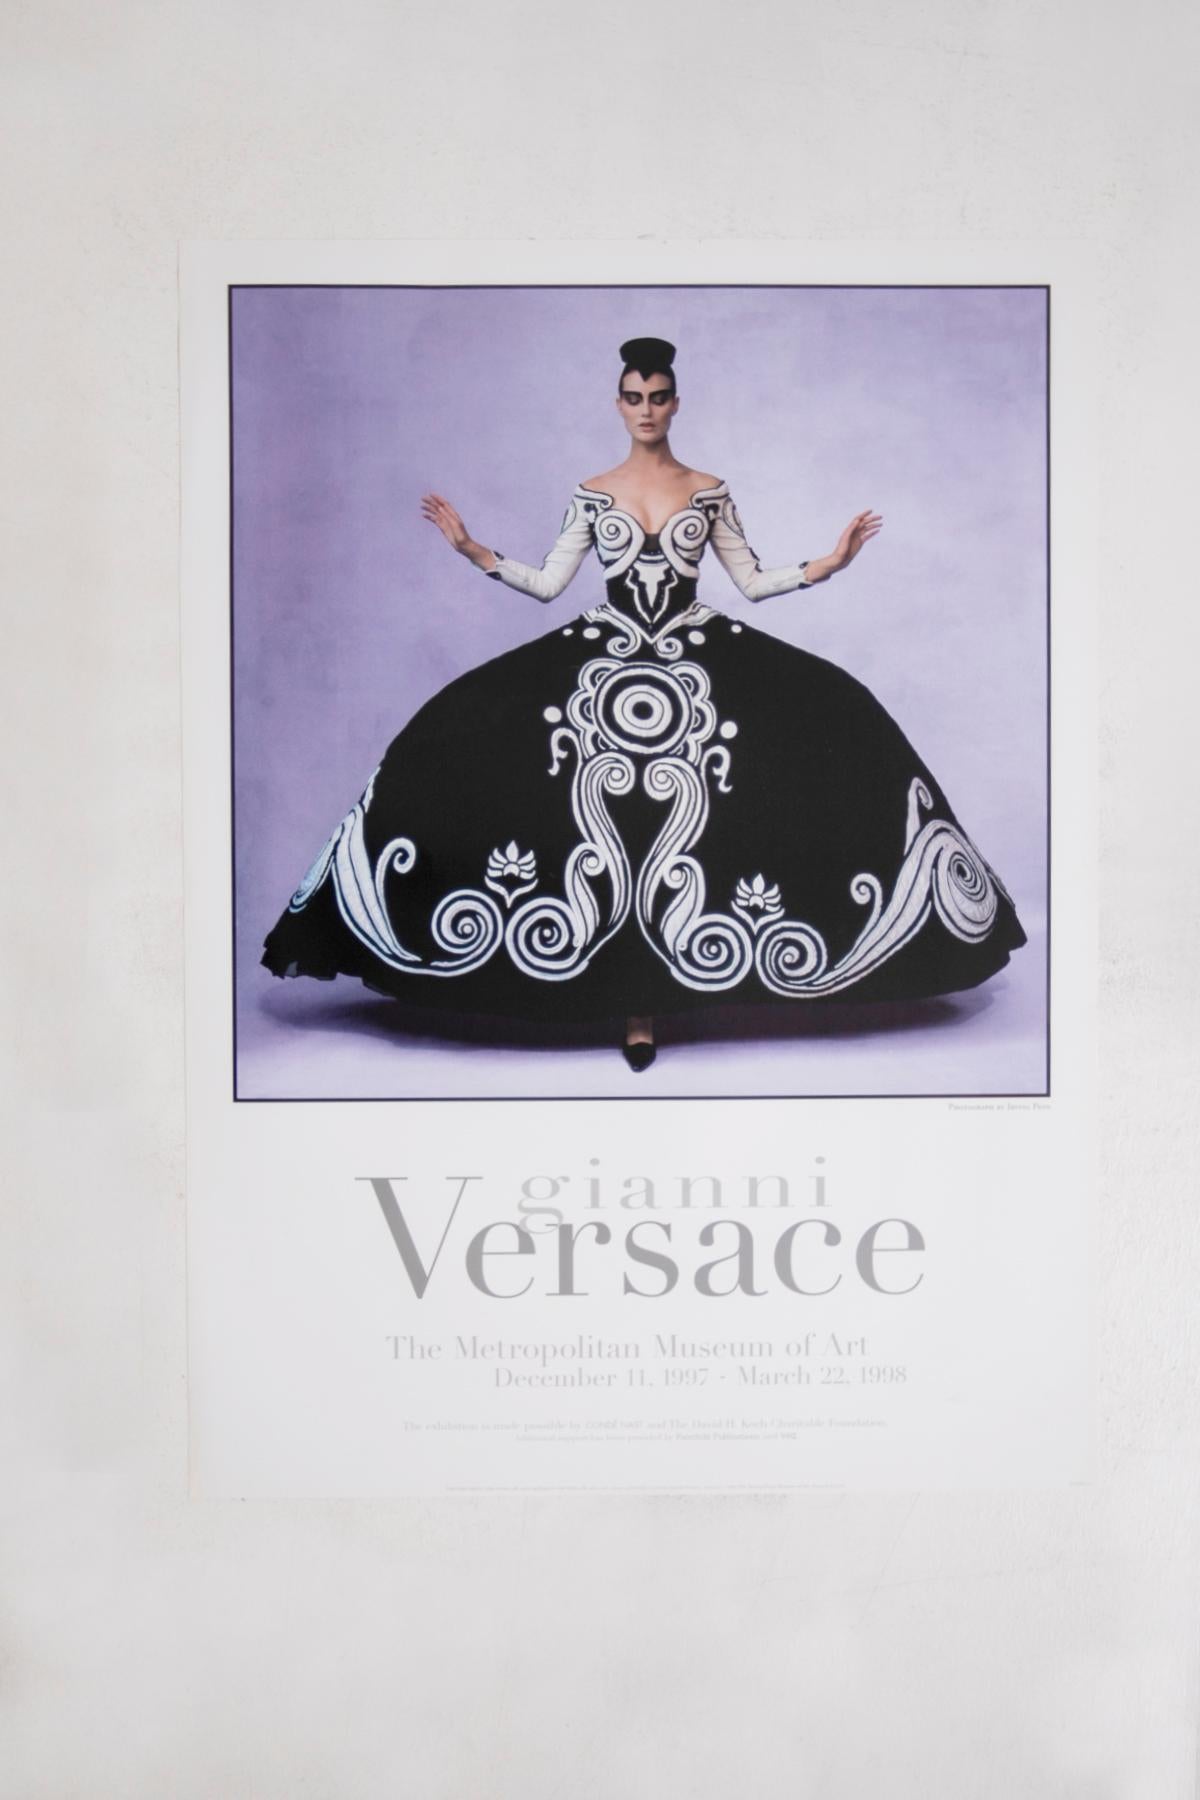 GIANNI Versace. Beautiful and rare Poster of the Metropolitan Museum of Art December 1997-March 1998 of the exhibition on Gianni Versace. The poster depicts a photograph by Irving Penn. Penn's photograph depicts the famous 1987 theatre costume in